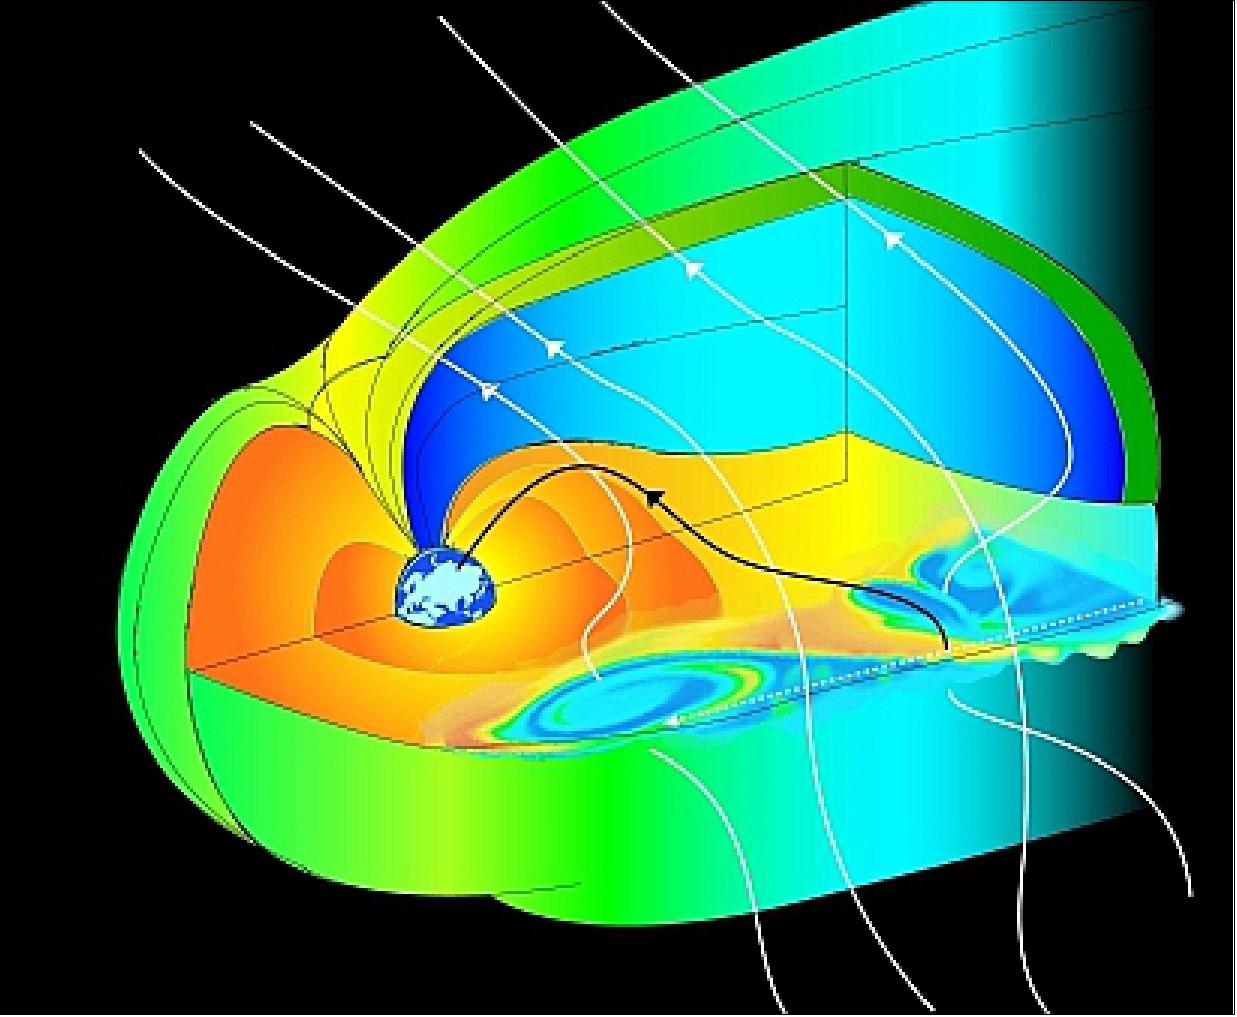 Figure 26: 3D cut-away view of Earth's magnetosphere with Kelvin-Helmholtz vortices in Earth's magnetosphere (image credit: H. Hasegawa (Dartmouth College))